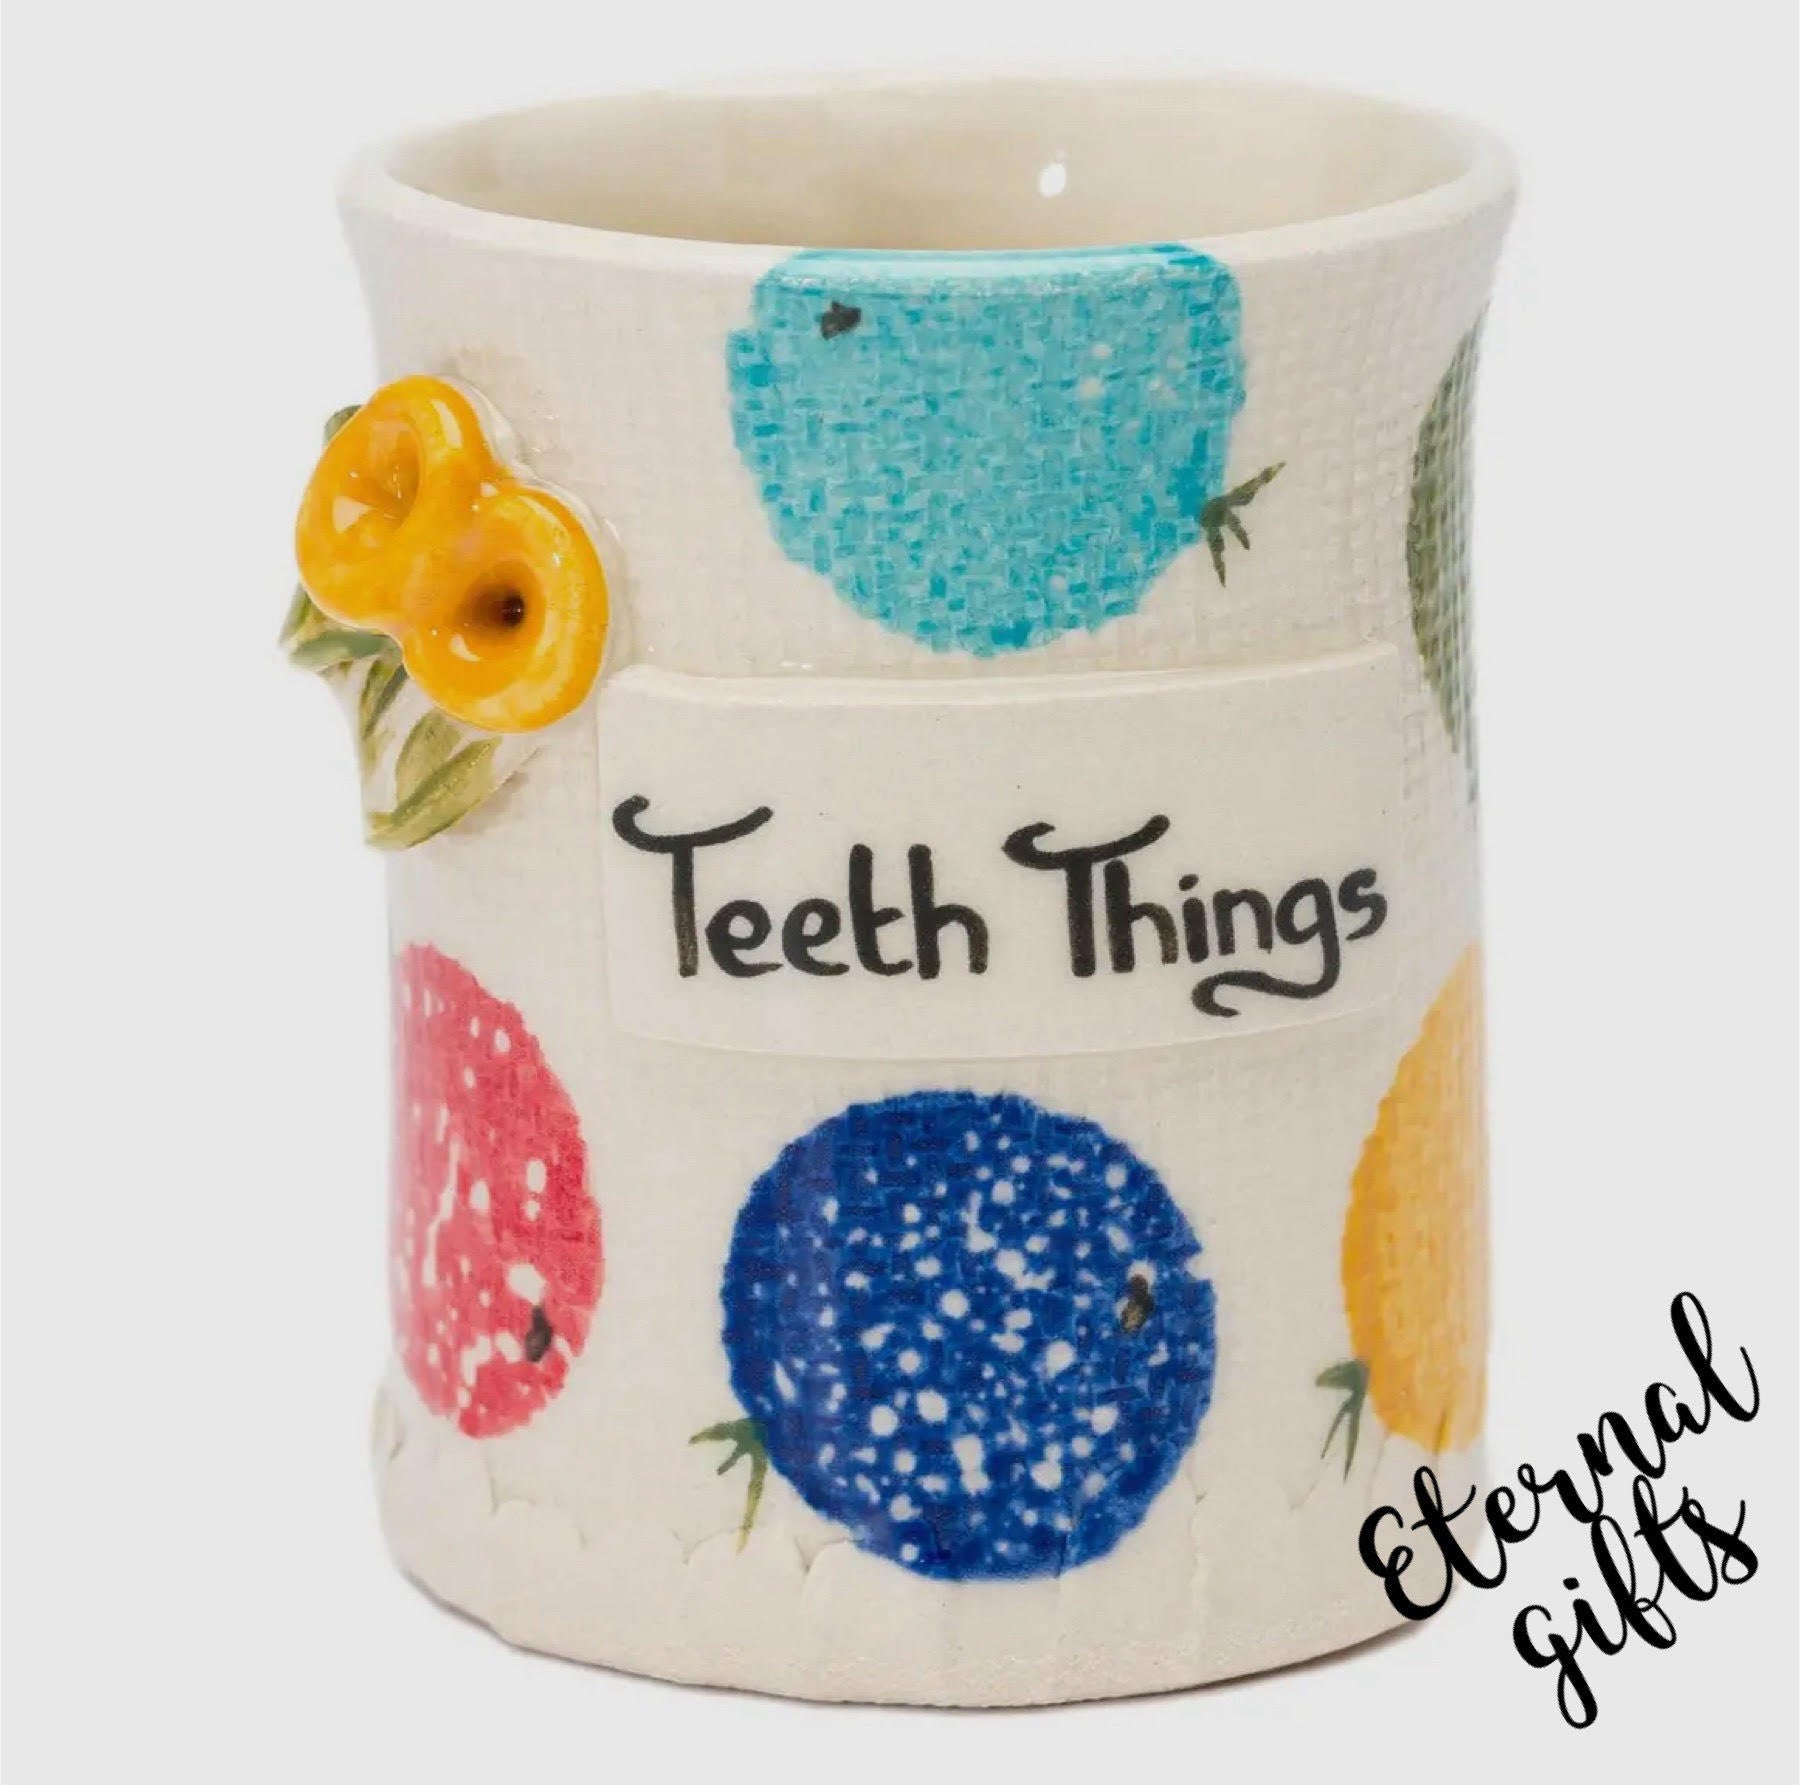 Teeth things ceramic Container by Stable Door Pottery